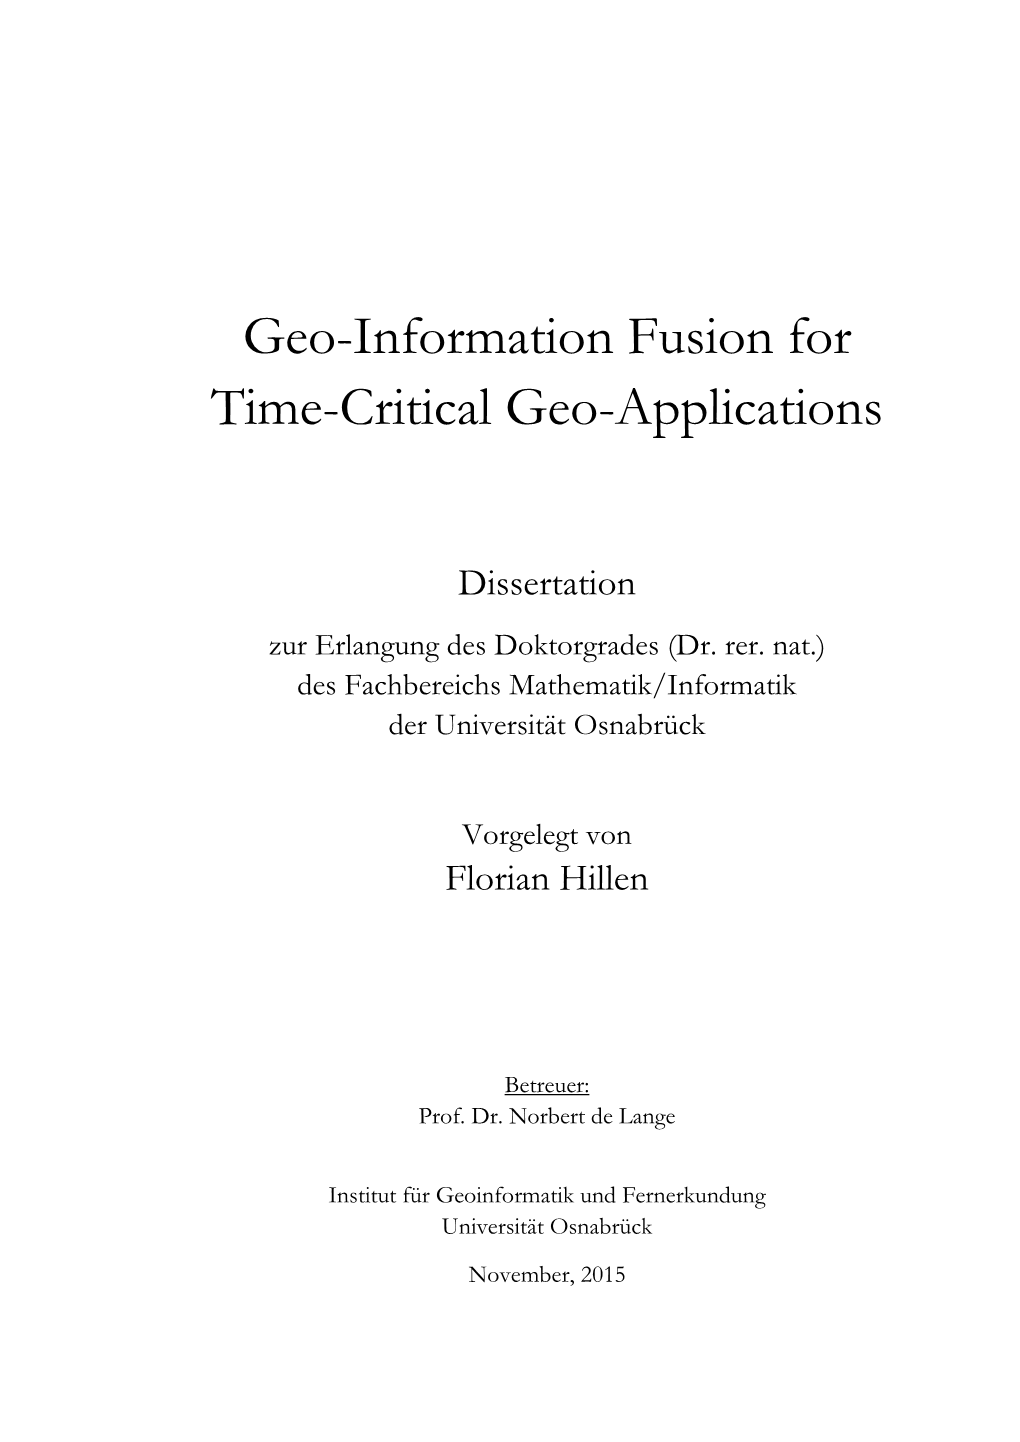 Geo-Information Fusion for Time-Critical Geo-Applications